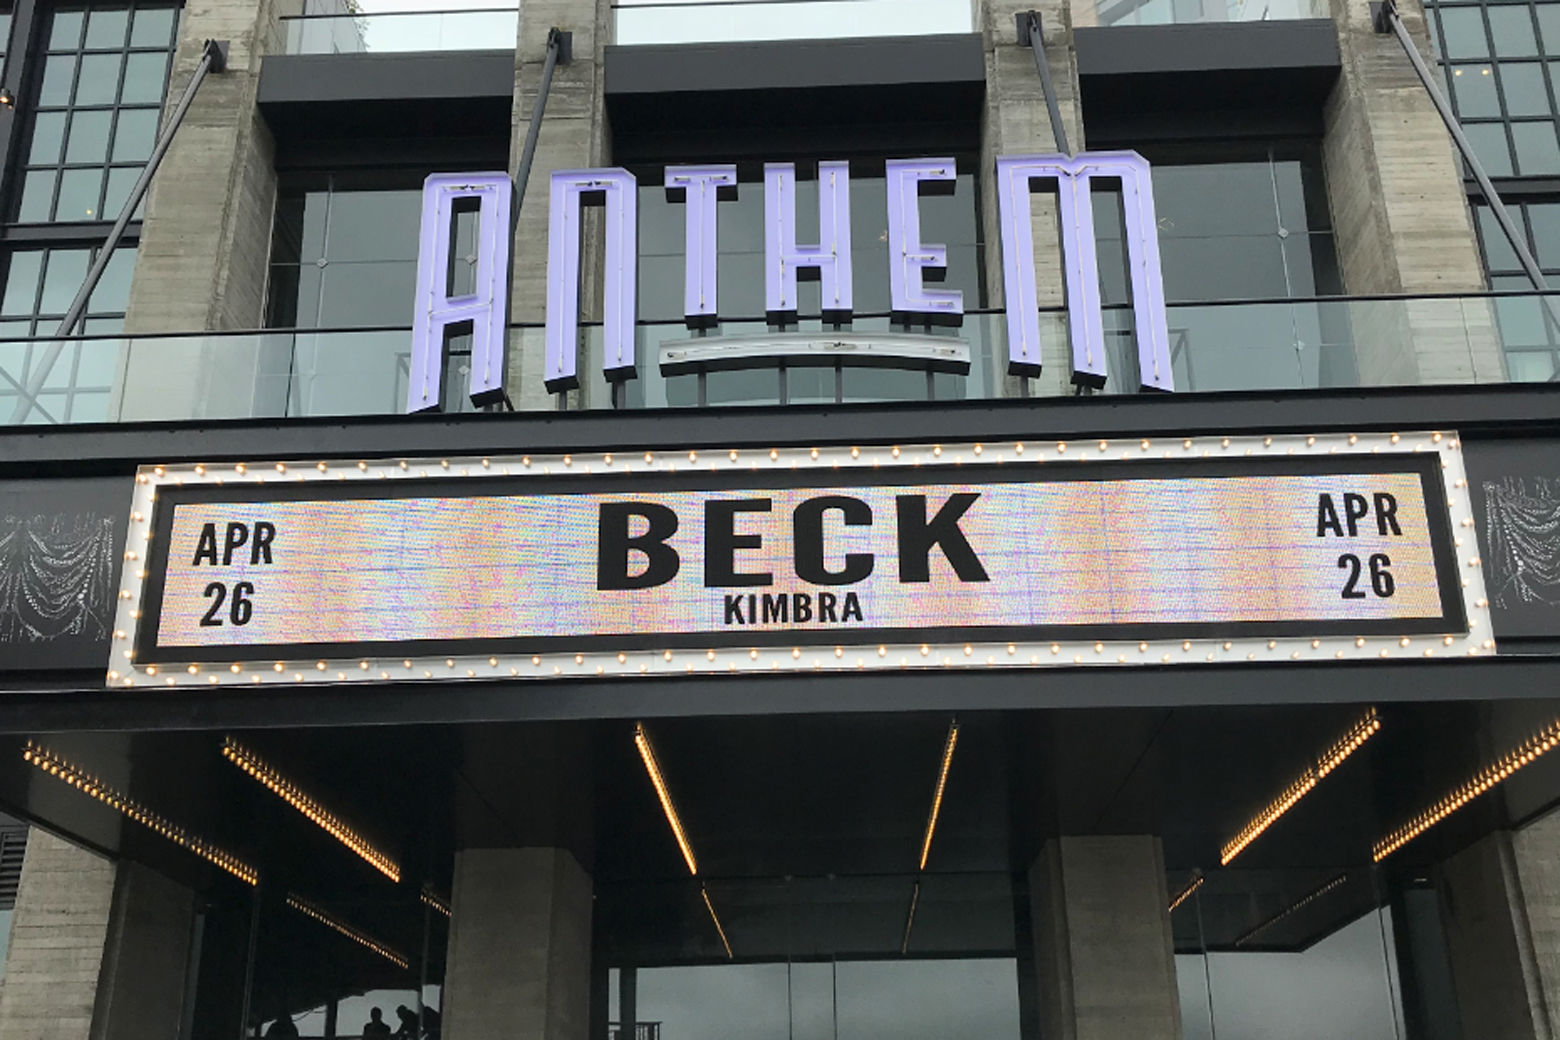 The Anthem marquee welcomes Beck to the Southwest Waterfront. (Courtesy Audrey Fix Schaefer)